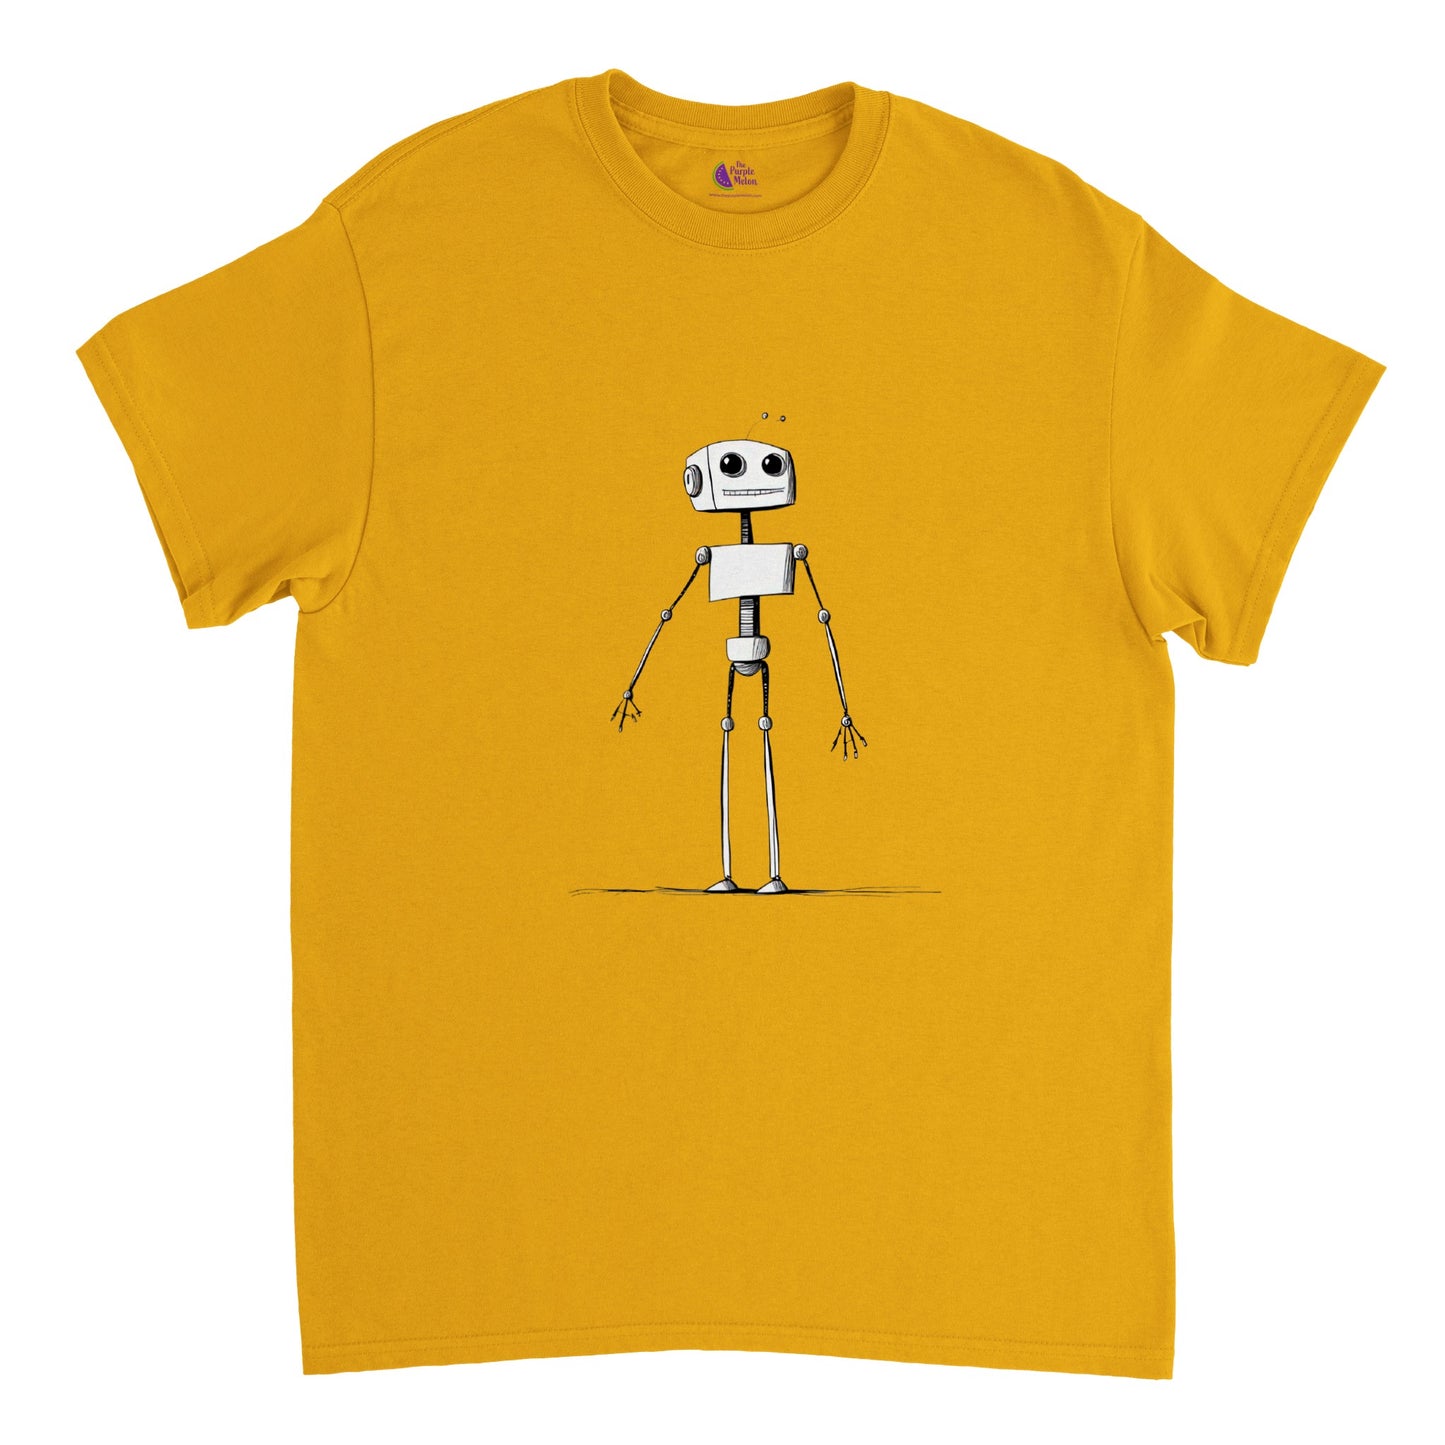 Gold t-shirt with smiling robot illustration